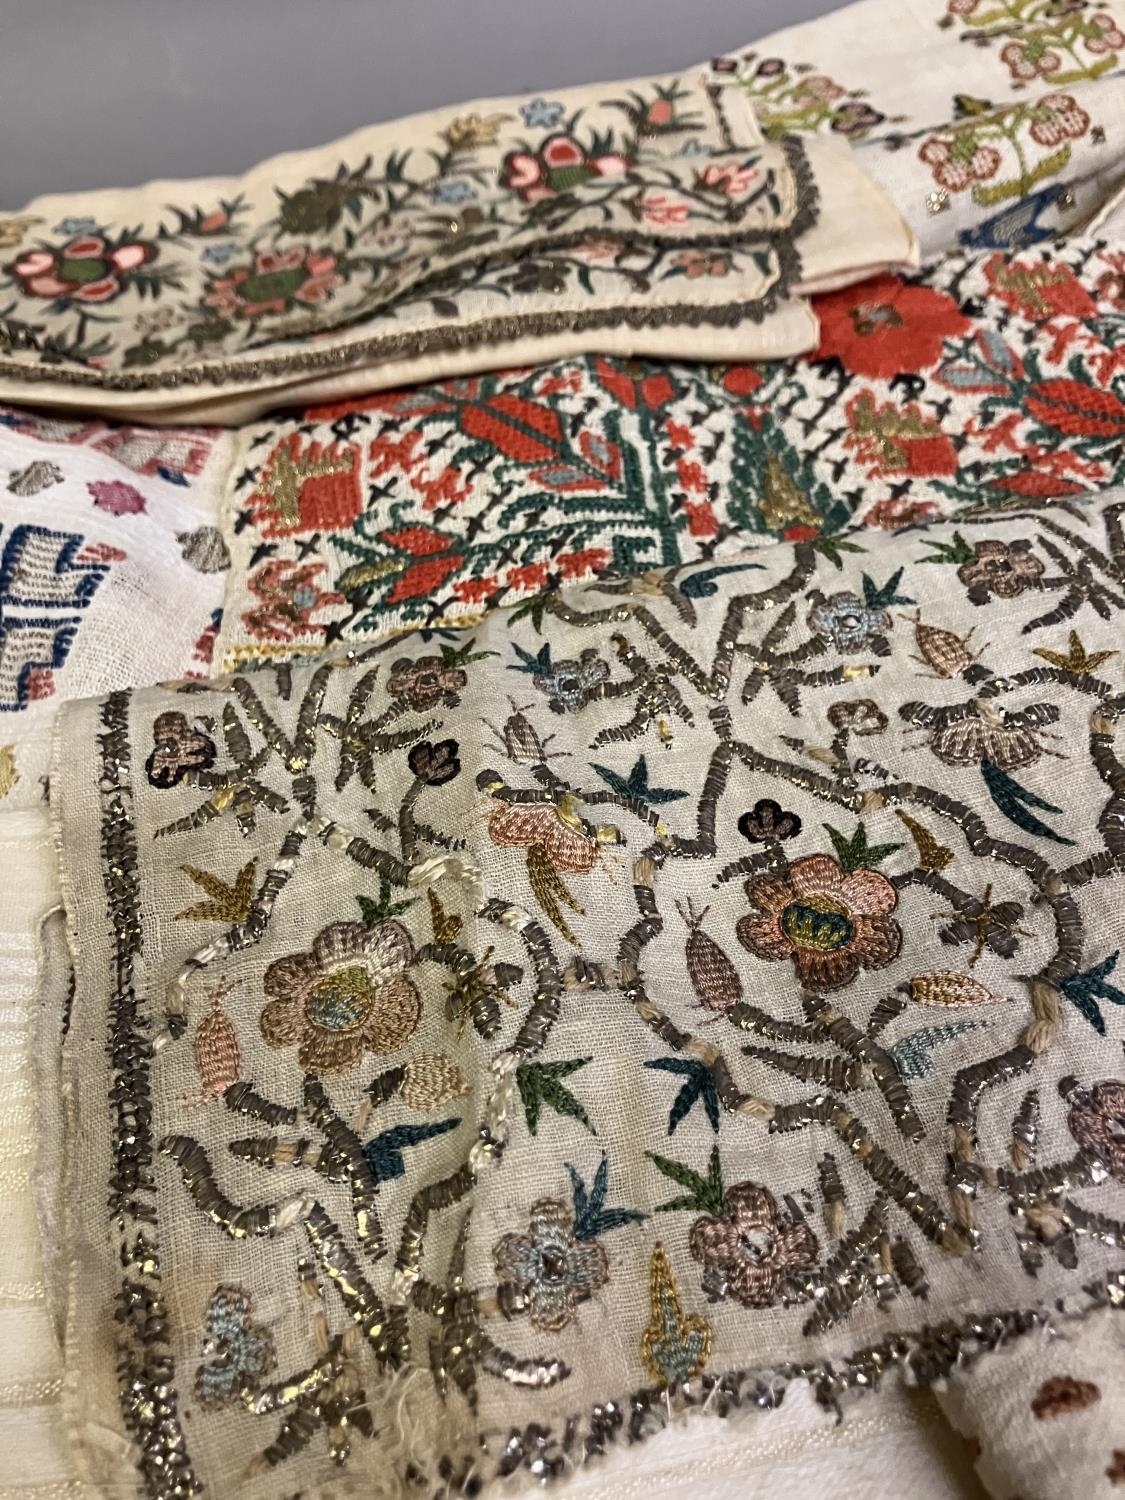 19th century Ottoman embroidered textiles, mainly towels, with sashes and end panels: ten examples - Image 2 of 3